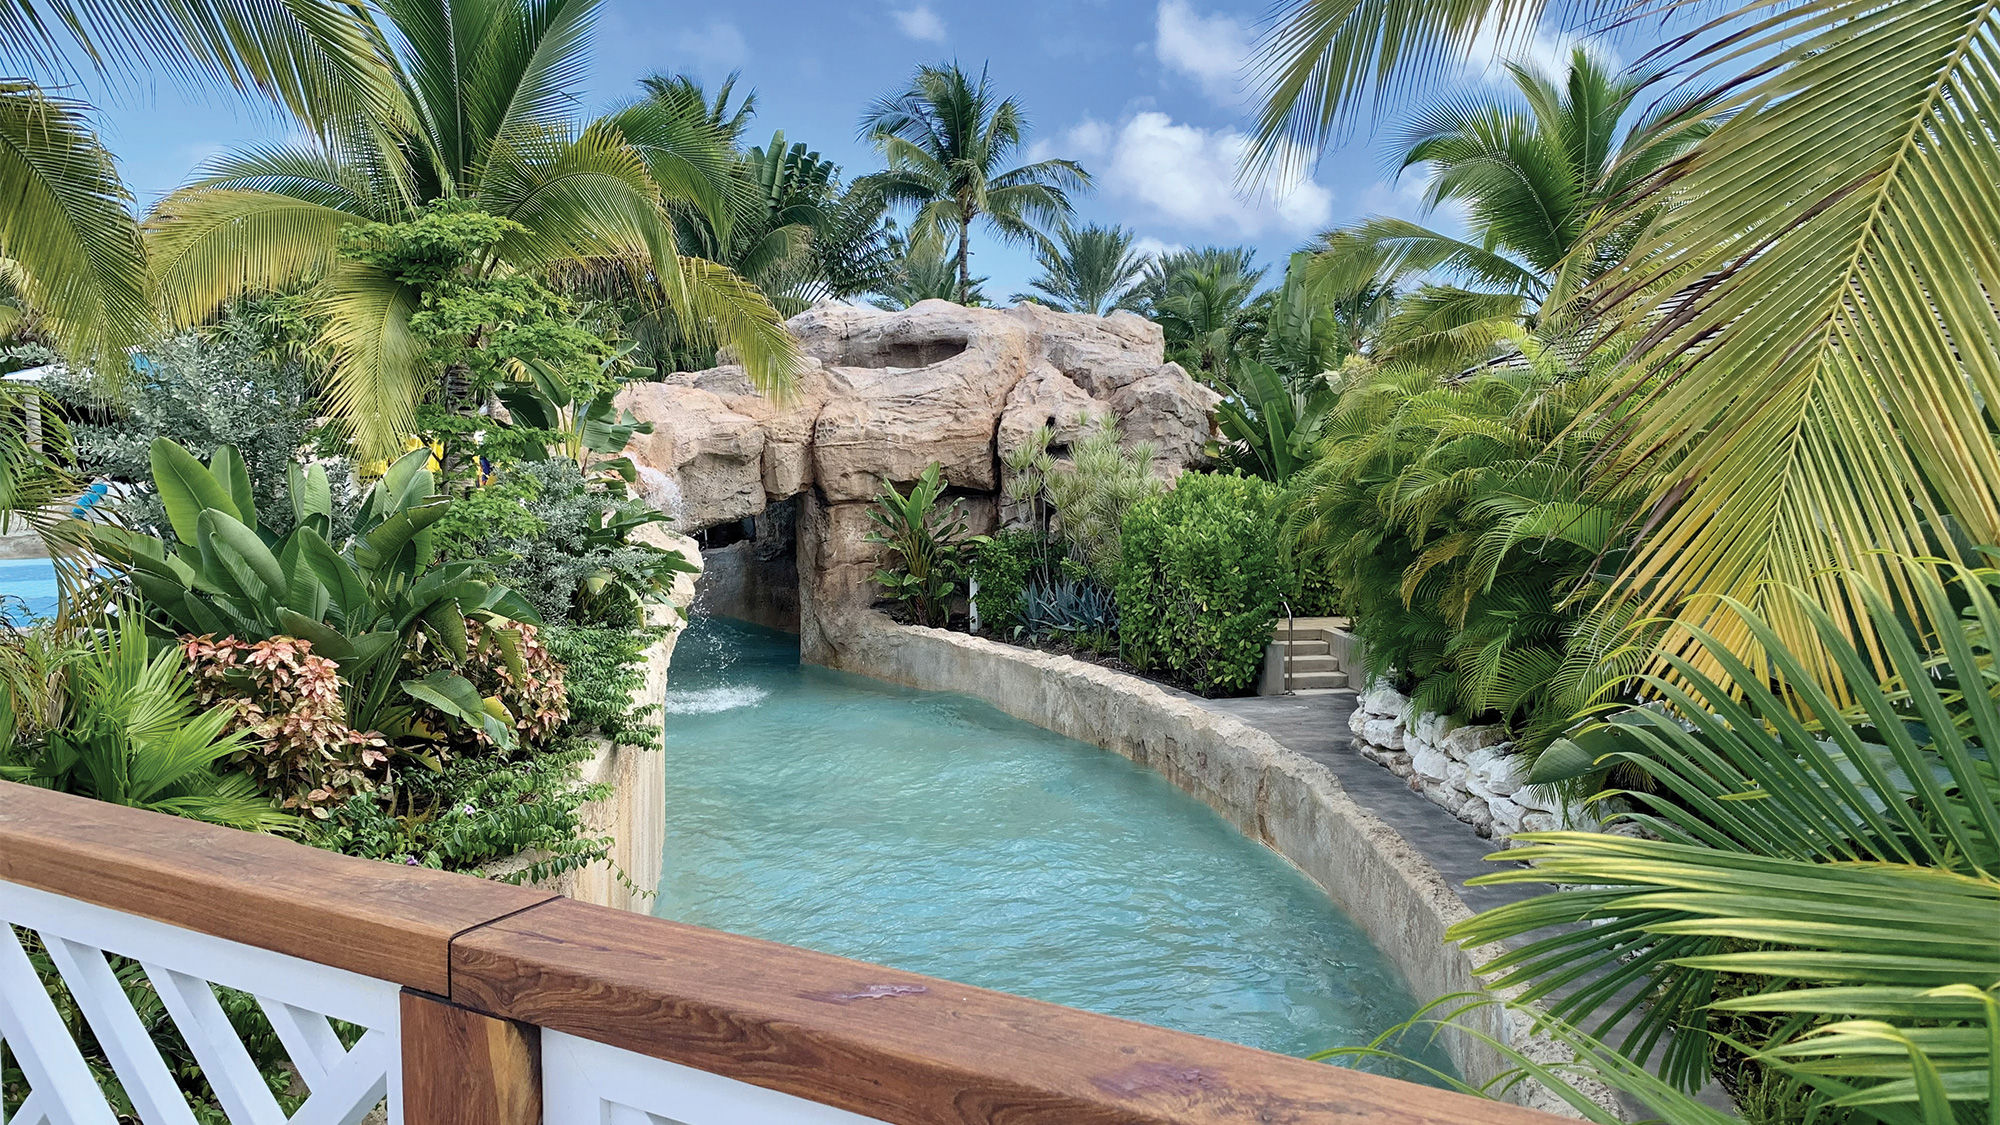 A view of The River, Baha Bay’s lazy river that meanders around the waterpark.